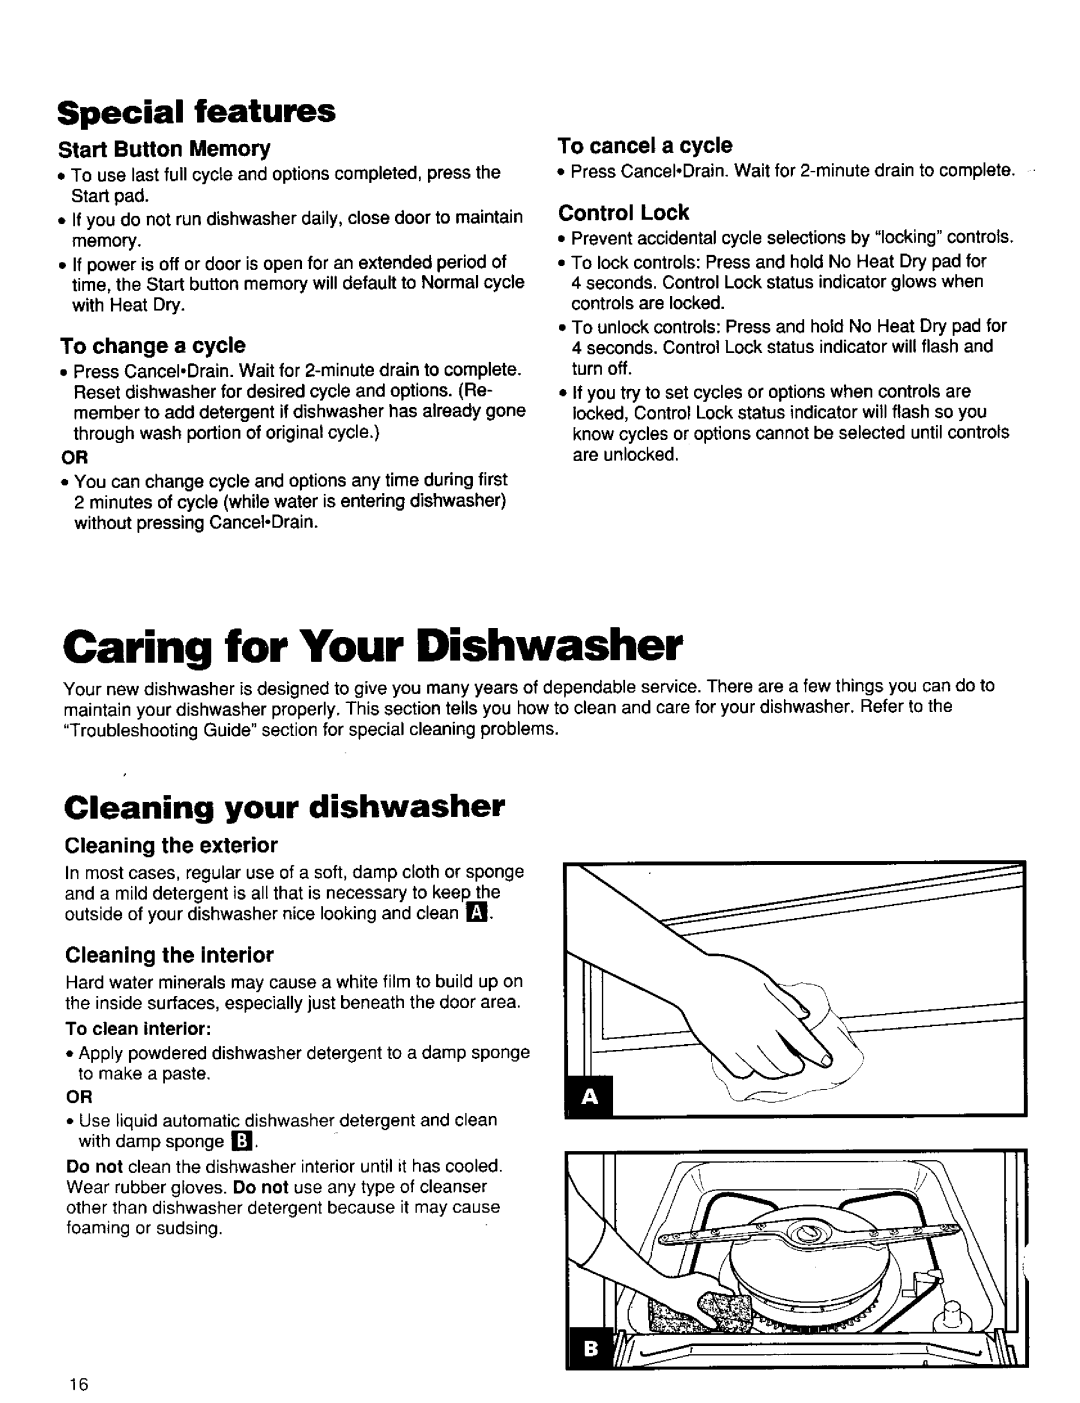 Kenmore 15838, 15835, 15831 manual Caring for Your Dishwasher, Special features, Start Button Memory, Control Lock 